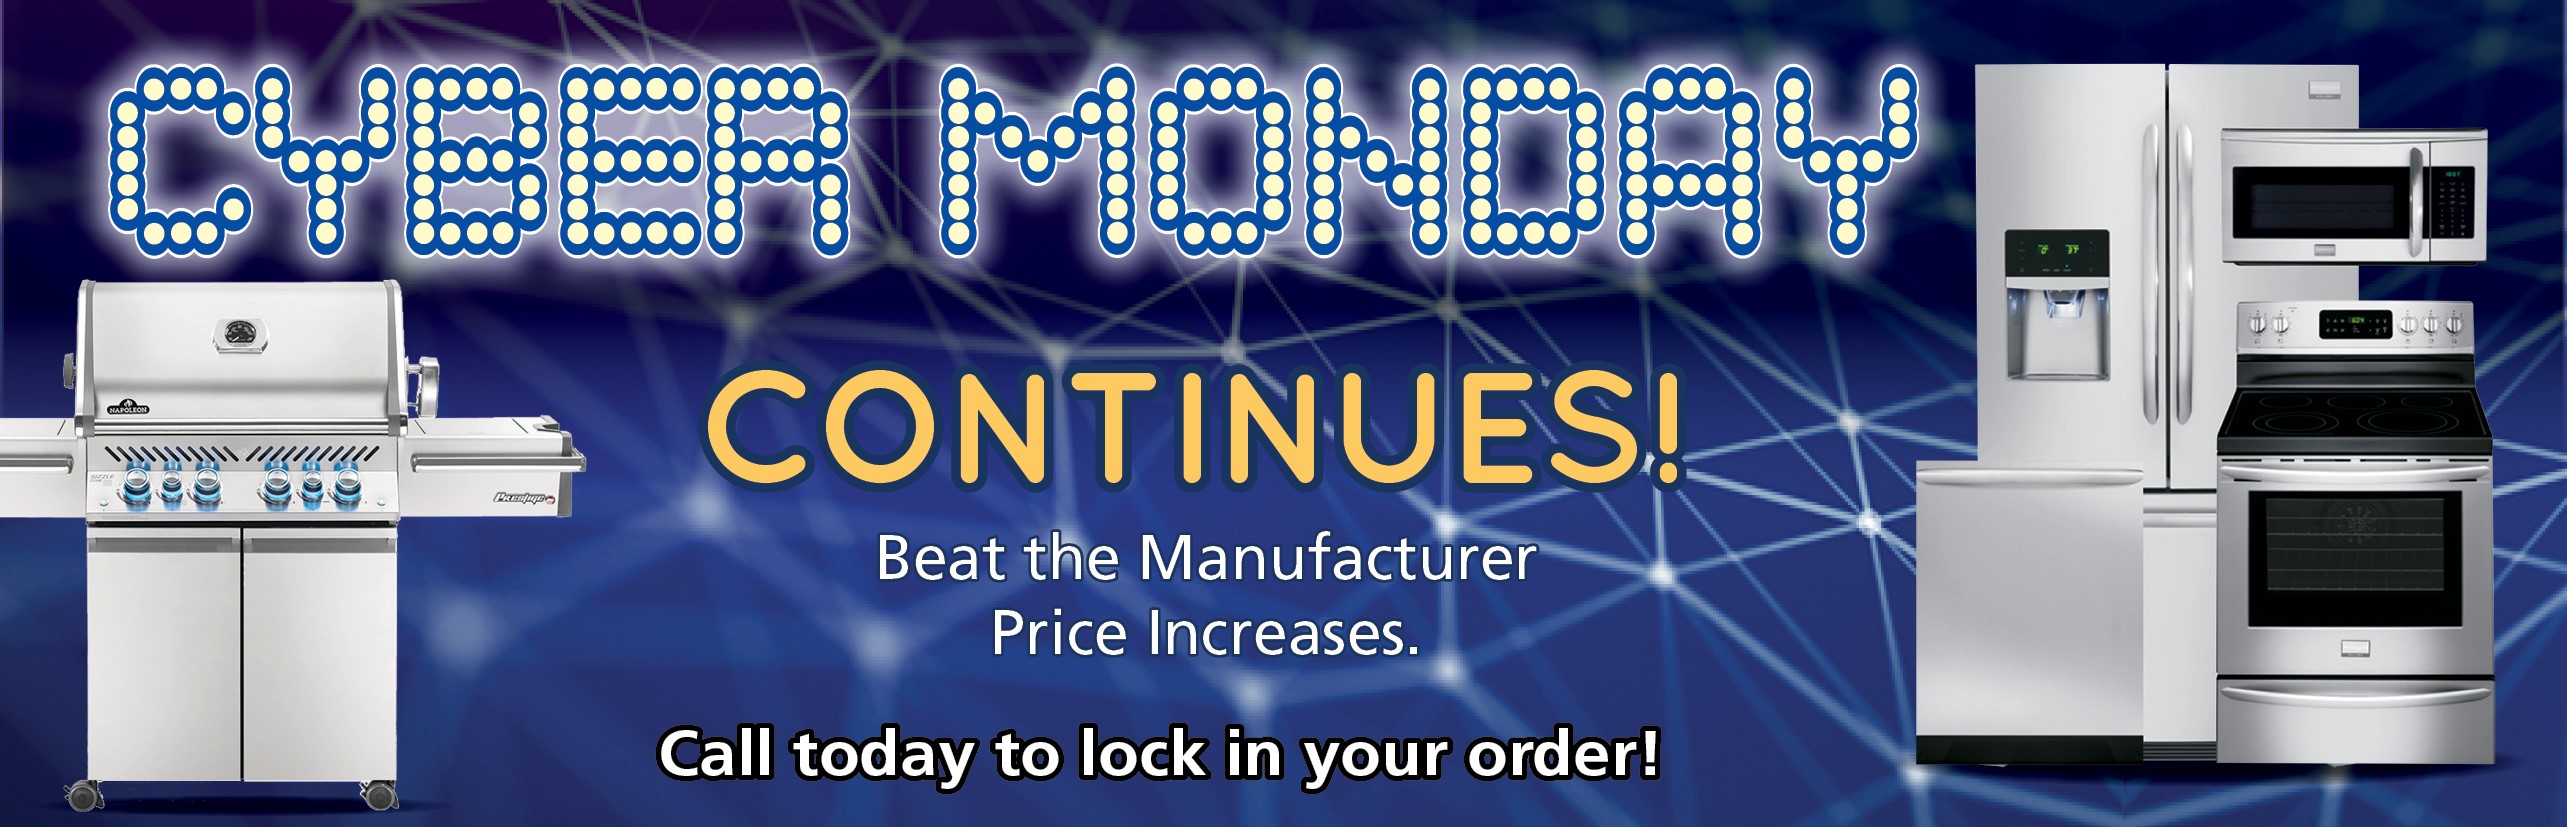  Cyber Monday Continues